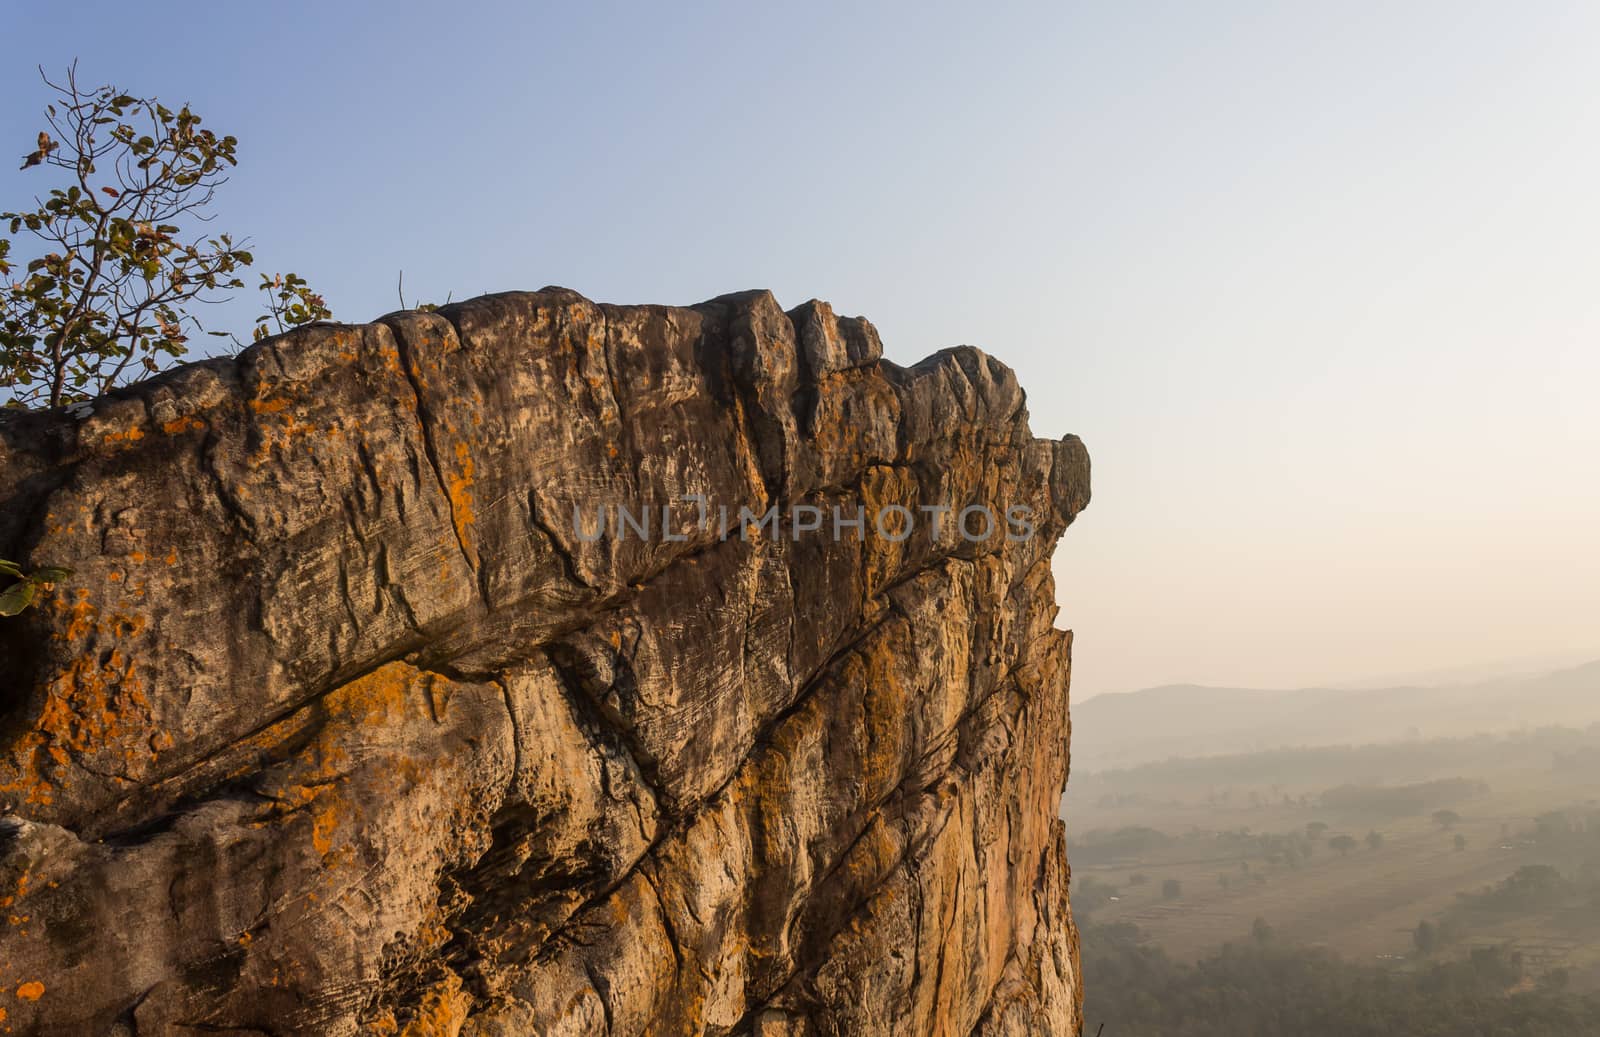 Pha Hua Rue Rock Cliff Mountain Hill Phayao Attractions Thailand with Warm Sun Light and Green Tree Landscape Side. Natural stone or rock mountain hill at Phayao northern Thailand travel